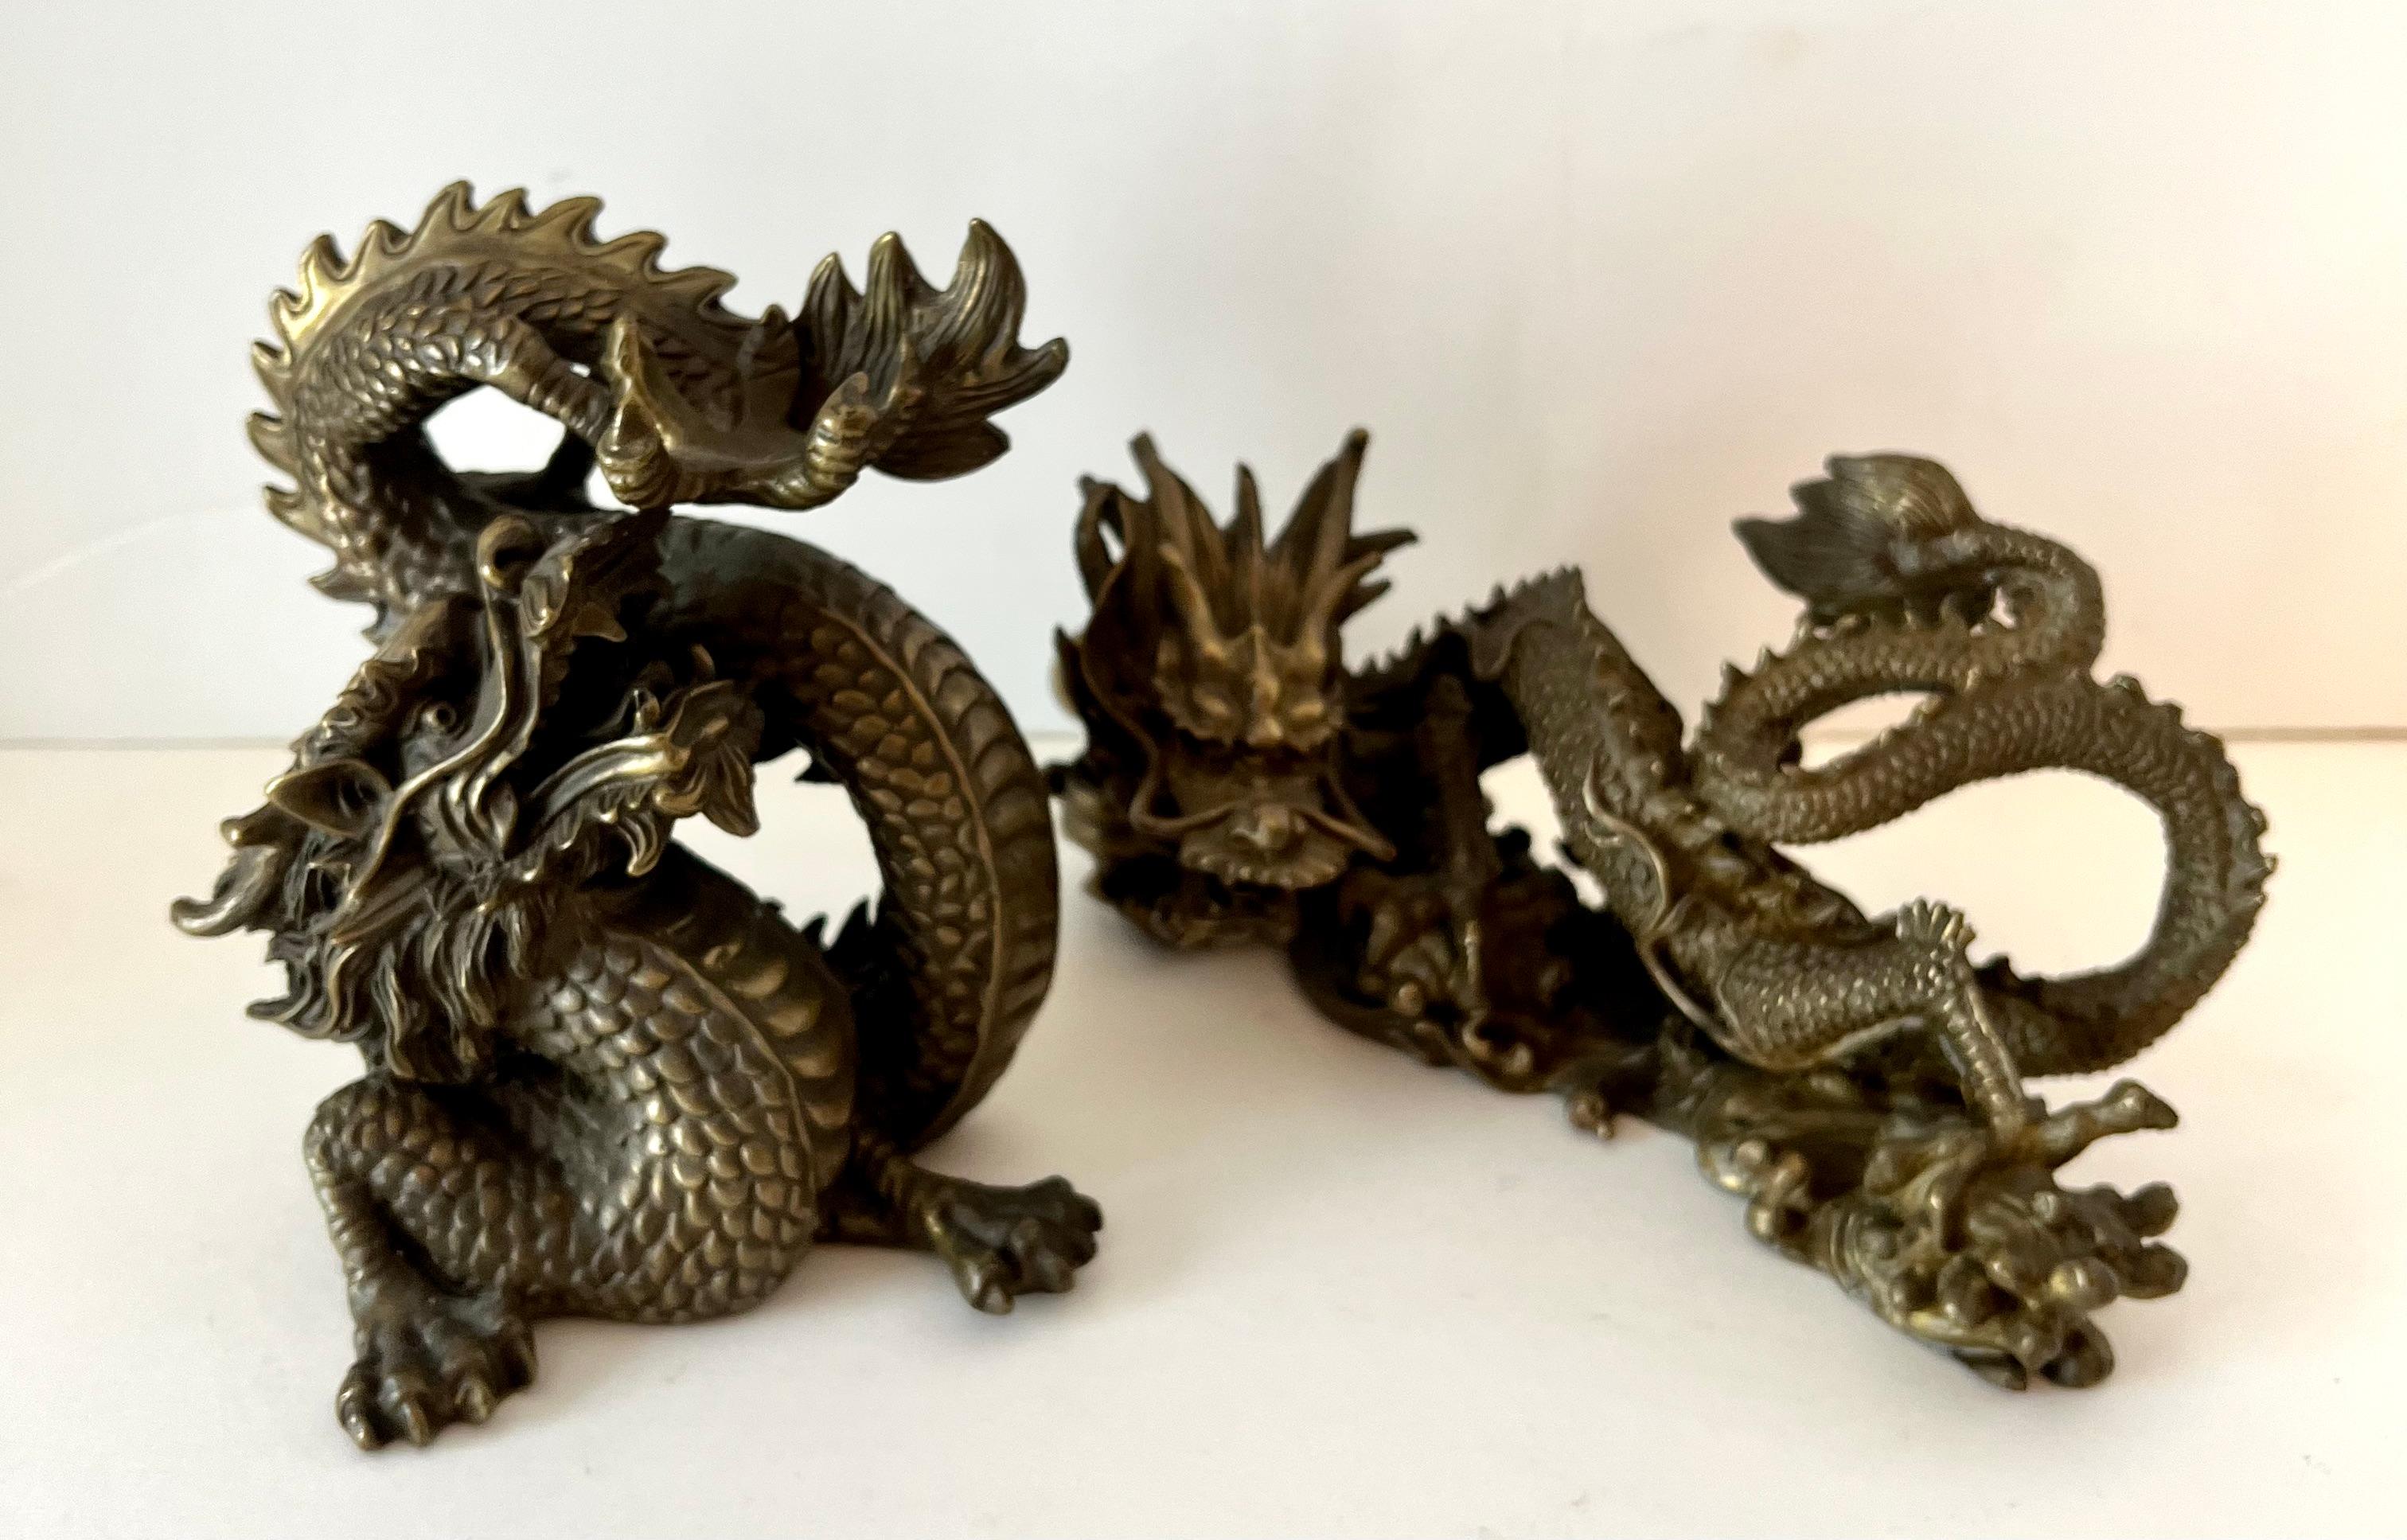 A pair of Dragons - the pair are very nice and well made.  They each have a weight of about 2.5 pounds each making them not only decorative, but could be used as bookends of paperweights.

one measures:  3.5